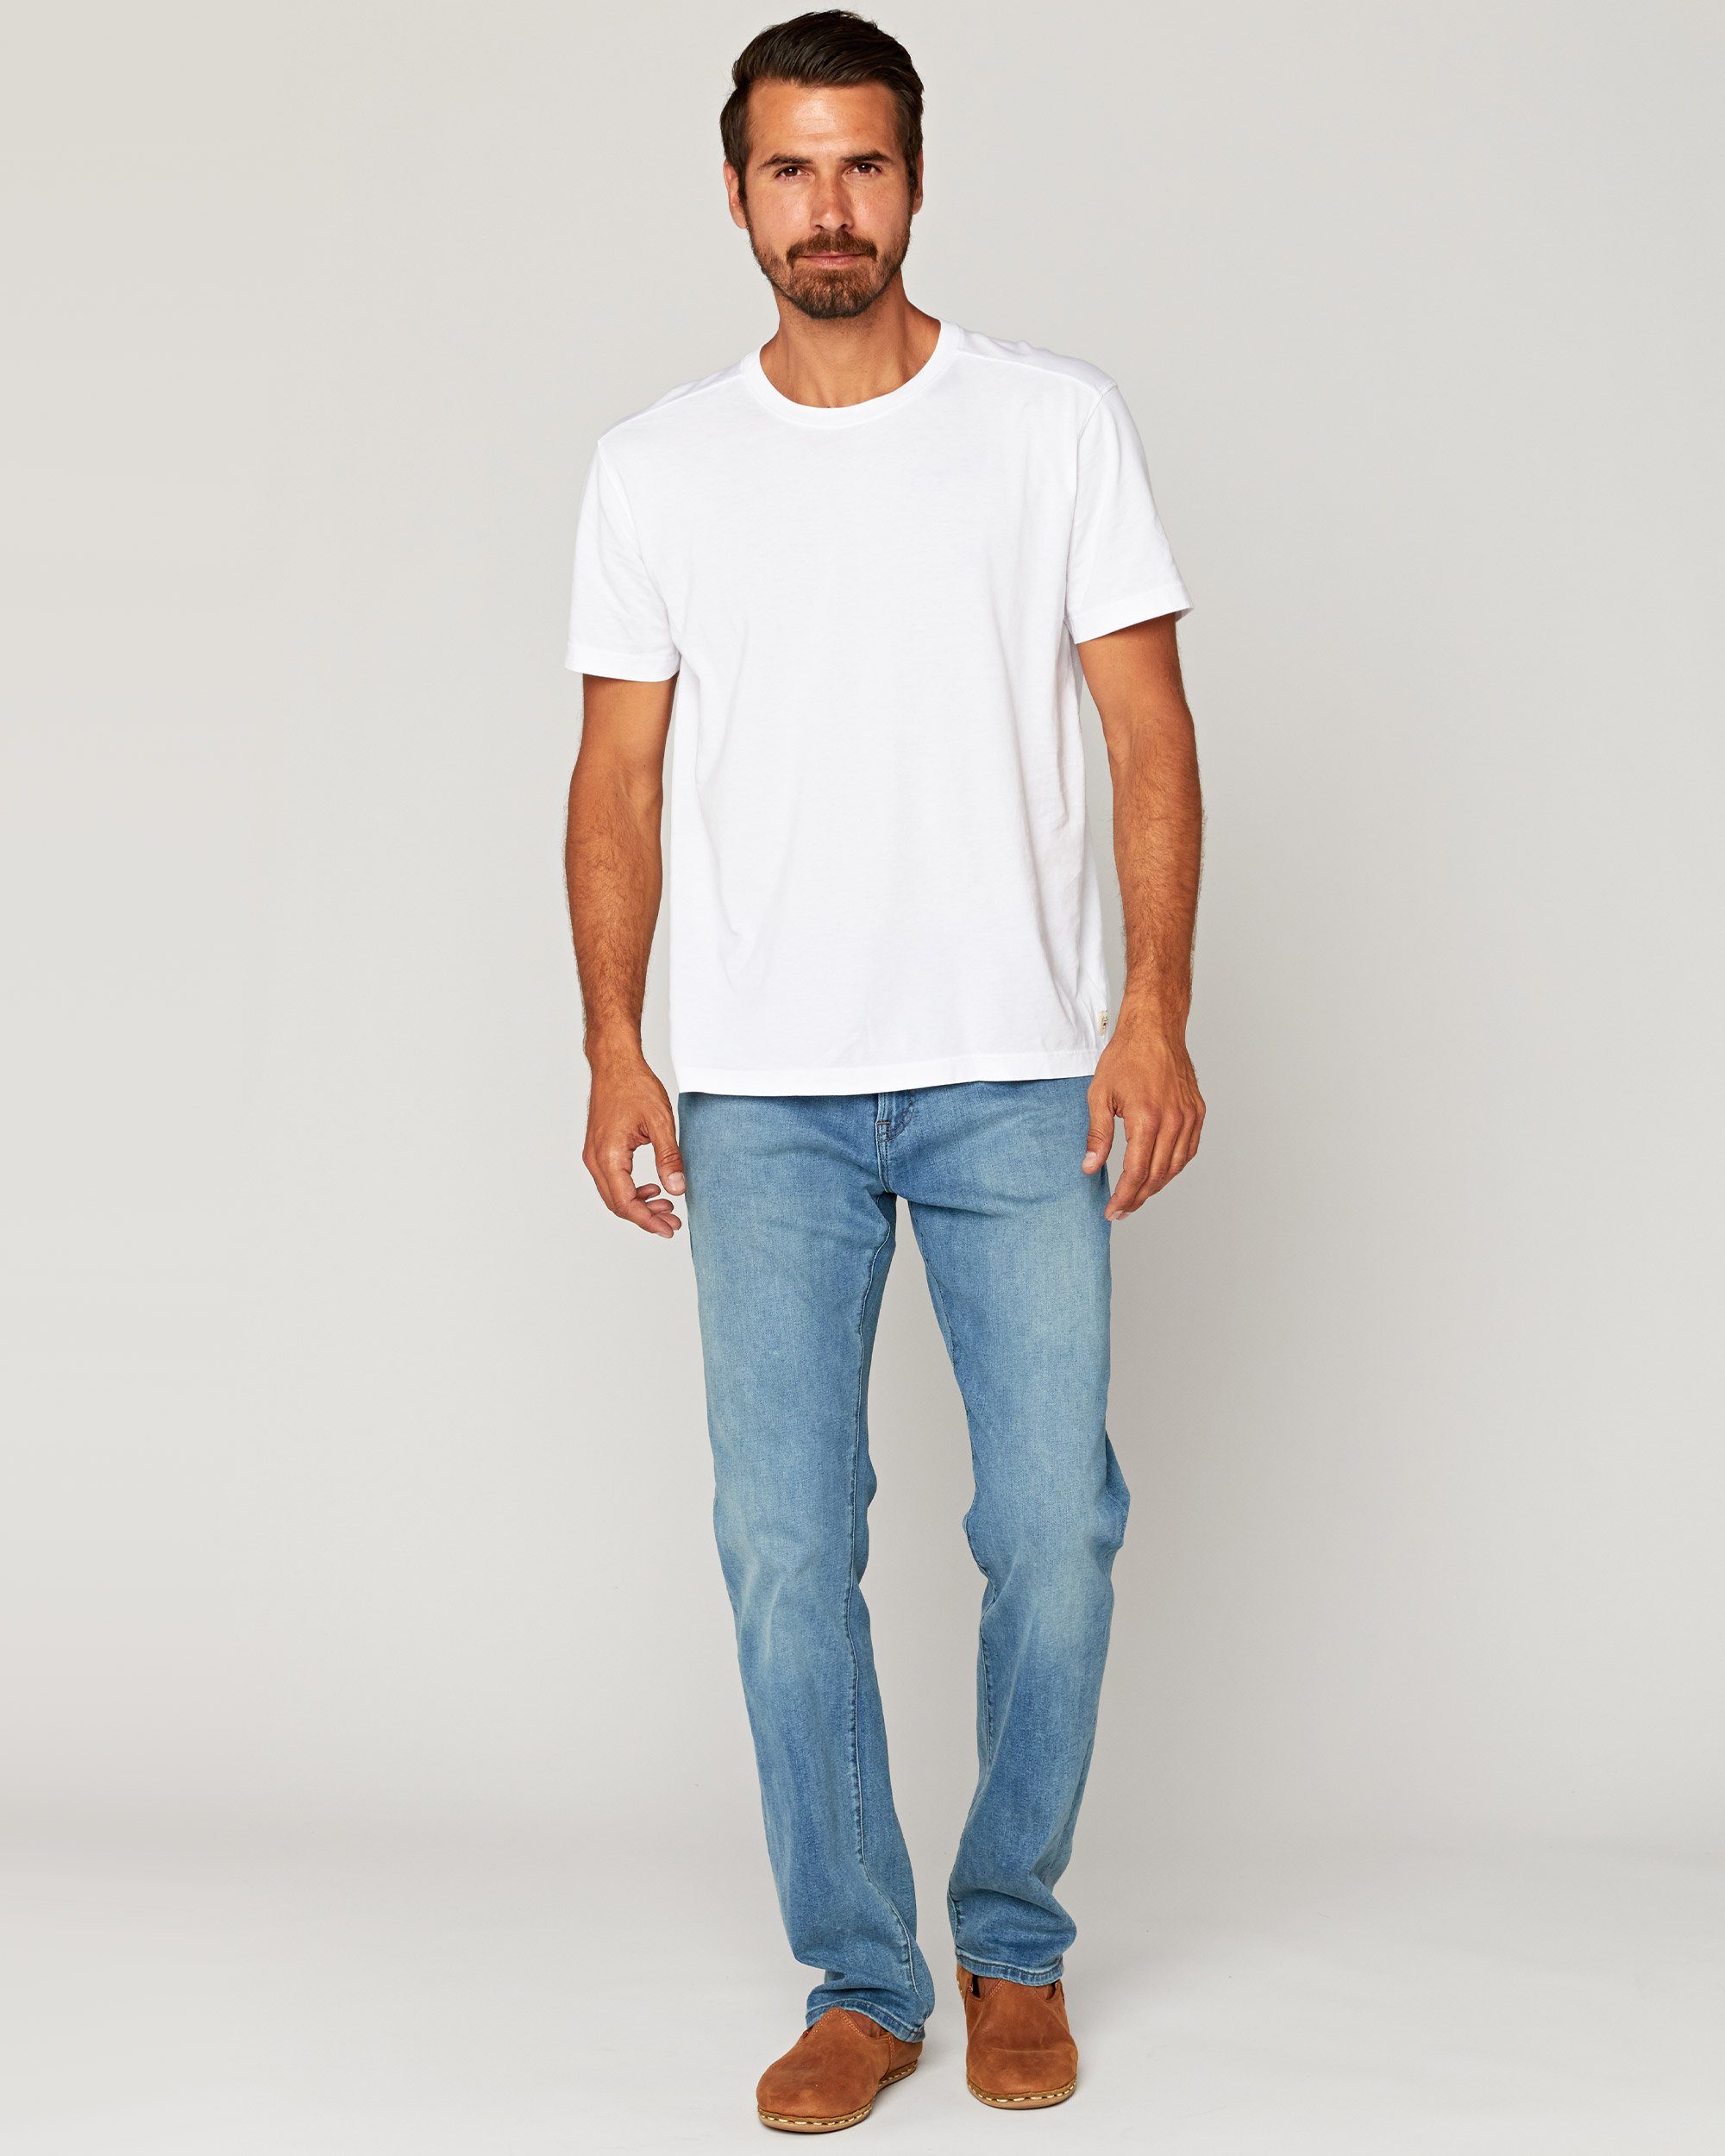 No. 7 Waterman Relaxed Fit Big Drakes Flex – Agave Denim